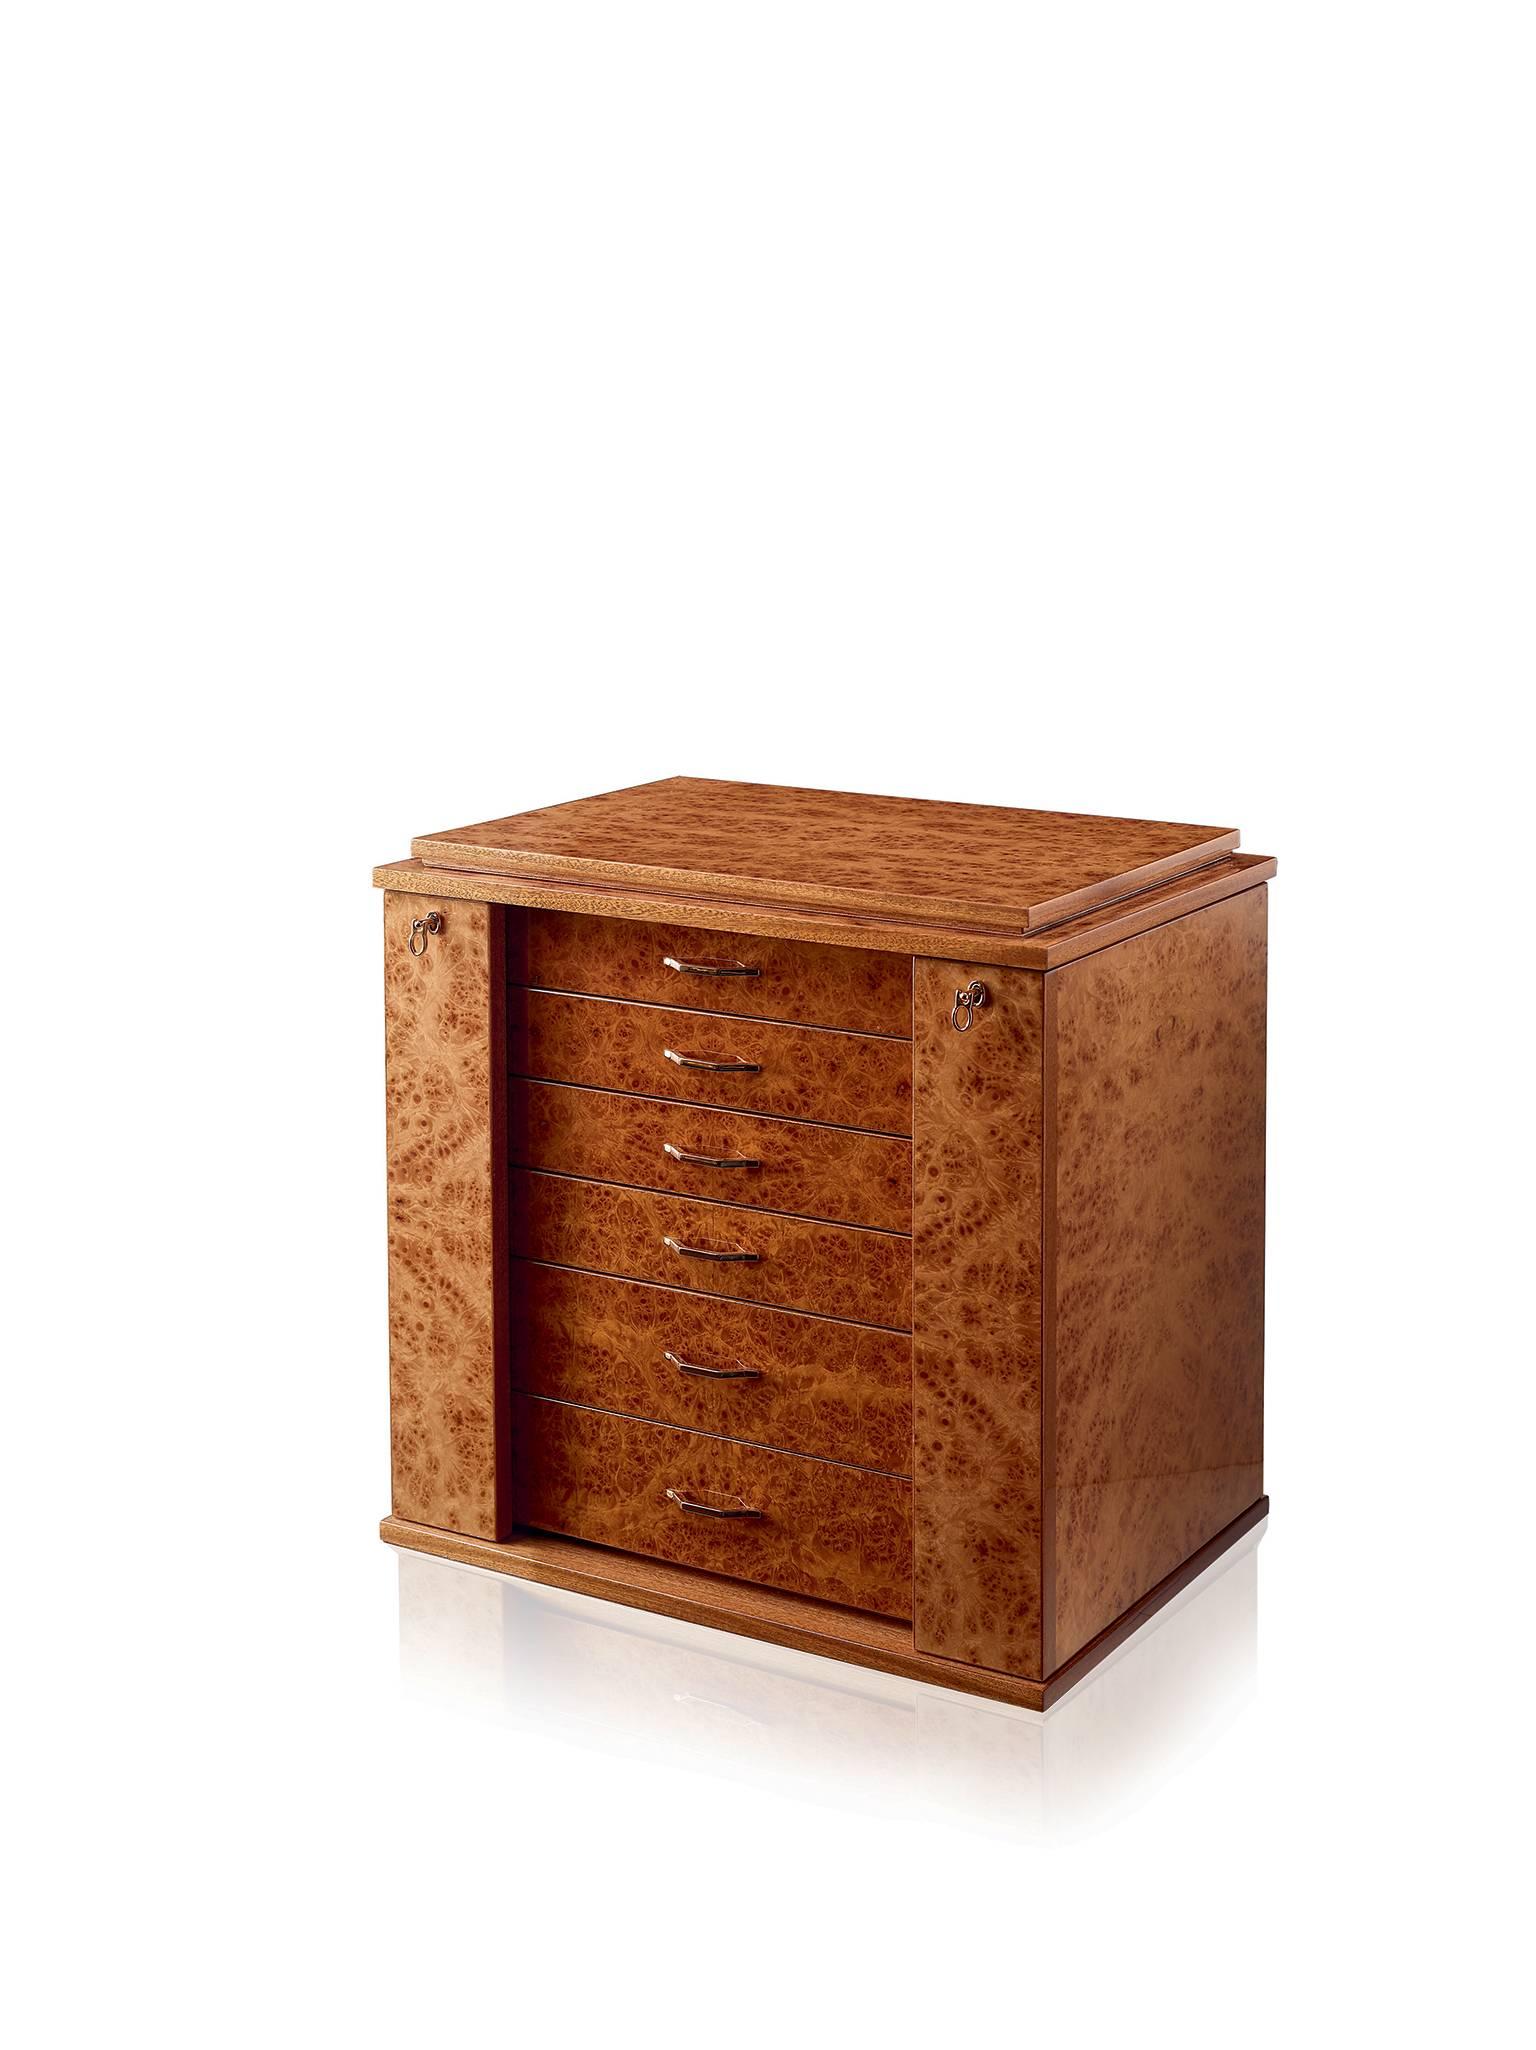 Jewelry chest in polished briarwood and mahogany, ultrasuede lining, 24-karats gold plated brass accessories. With necklace bars, lockable doors and five drawers. Adjustable mirror on the top section.